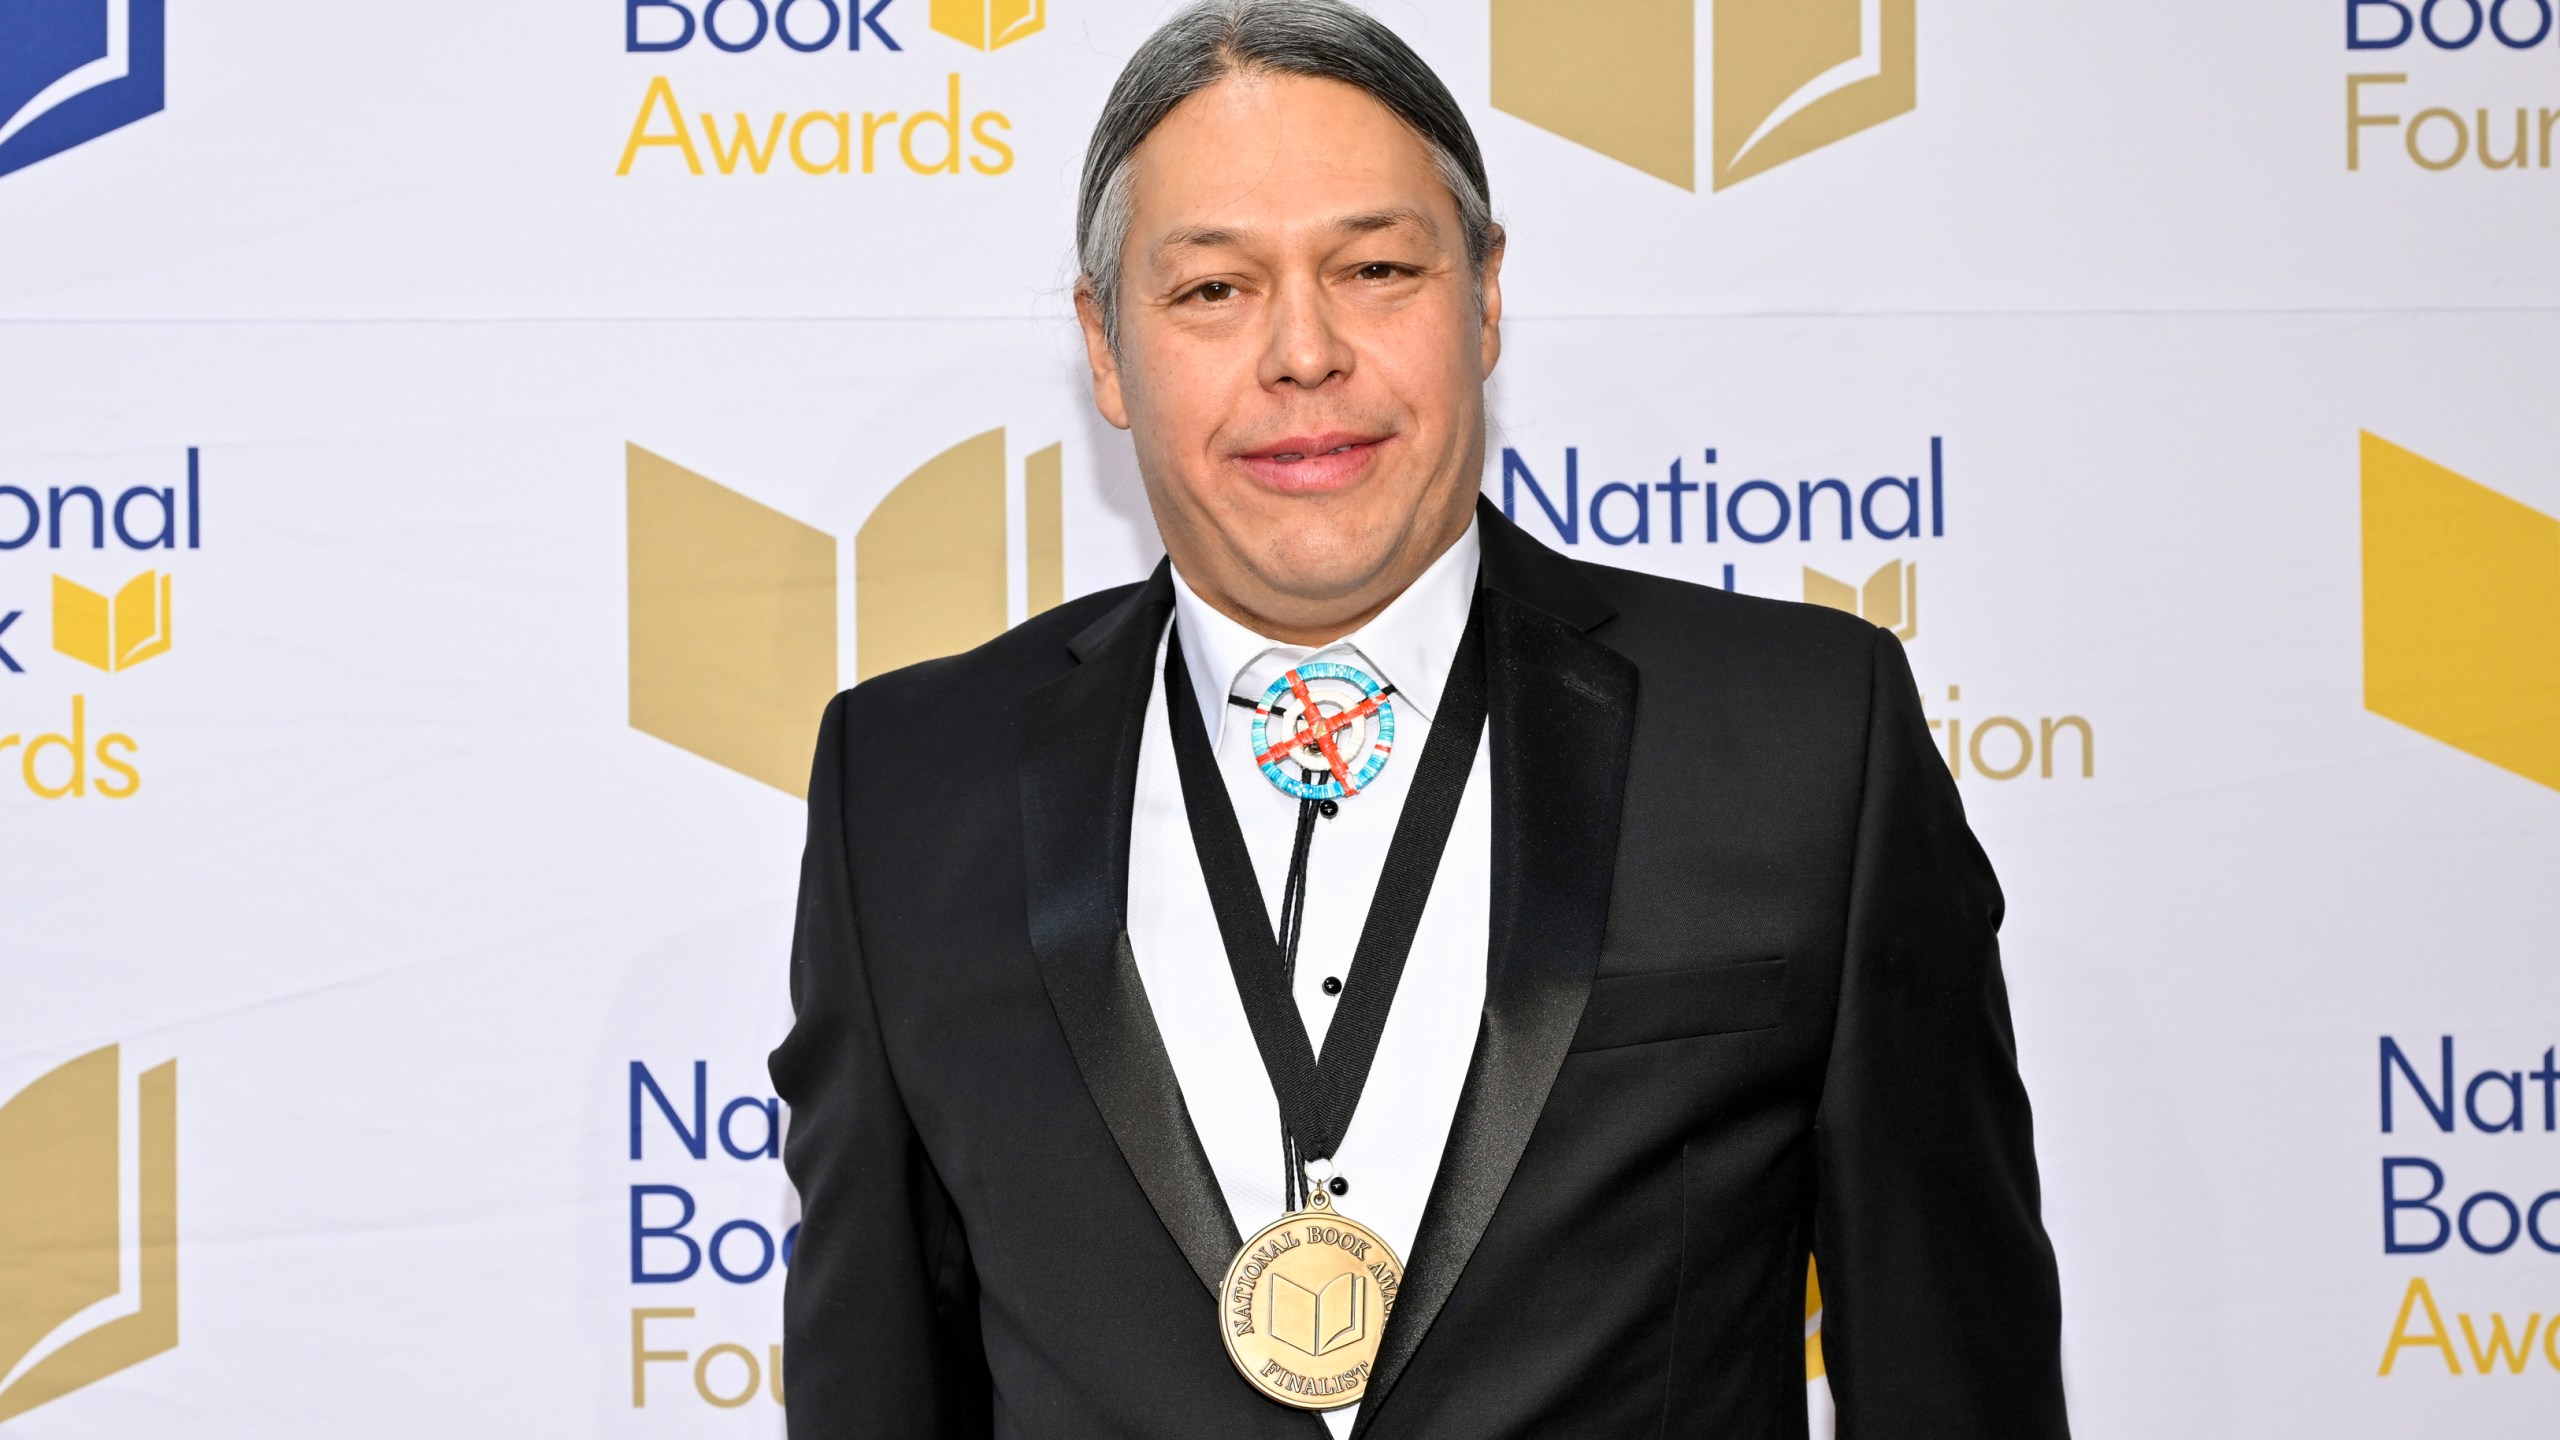 FILE - Ned Blackhawk appears at the 74th National Book Awards ceremony on Nov. 15, 2023, in New York. (Photo by Evan Agostini/Invision/AP, File)